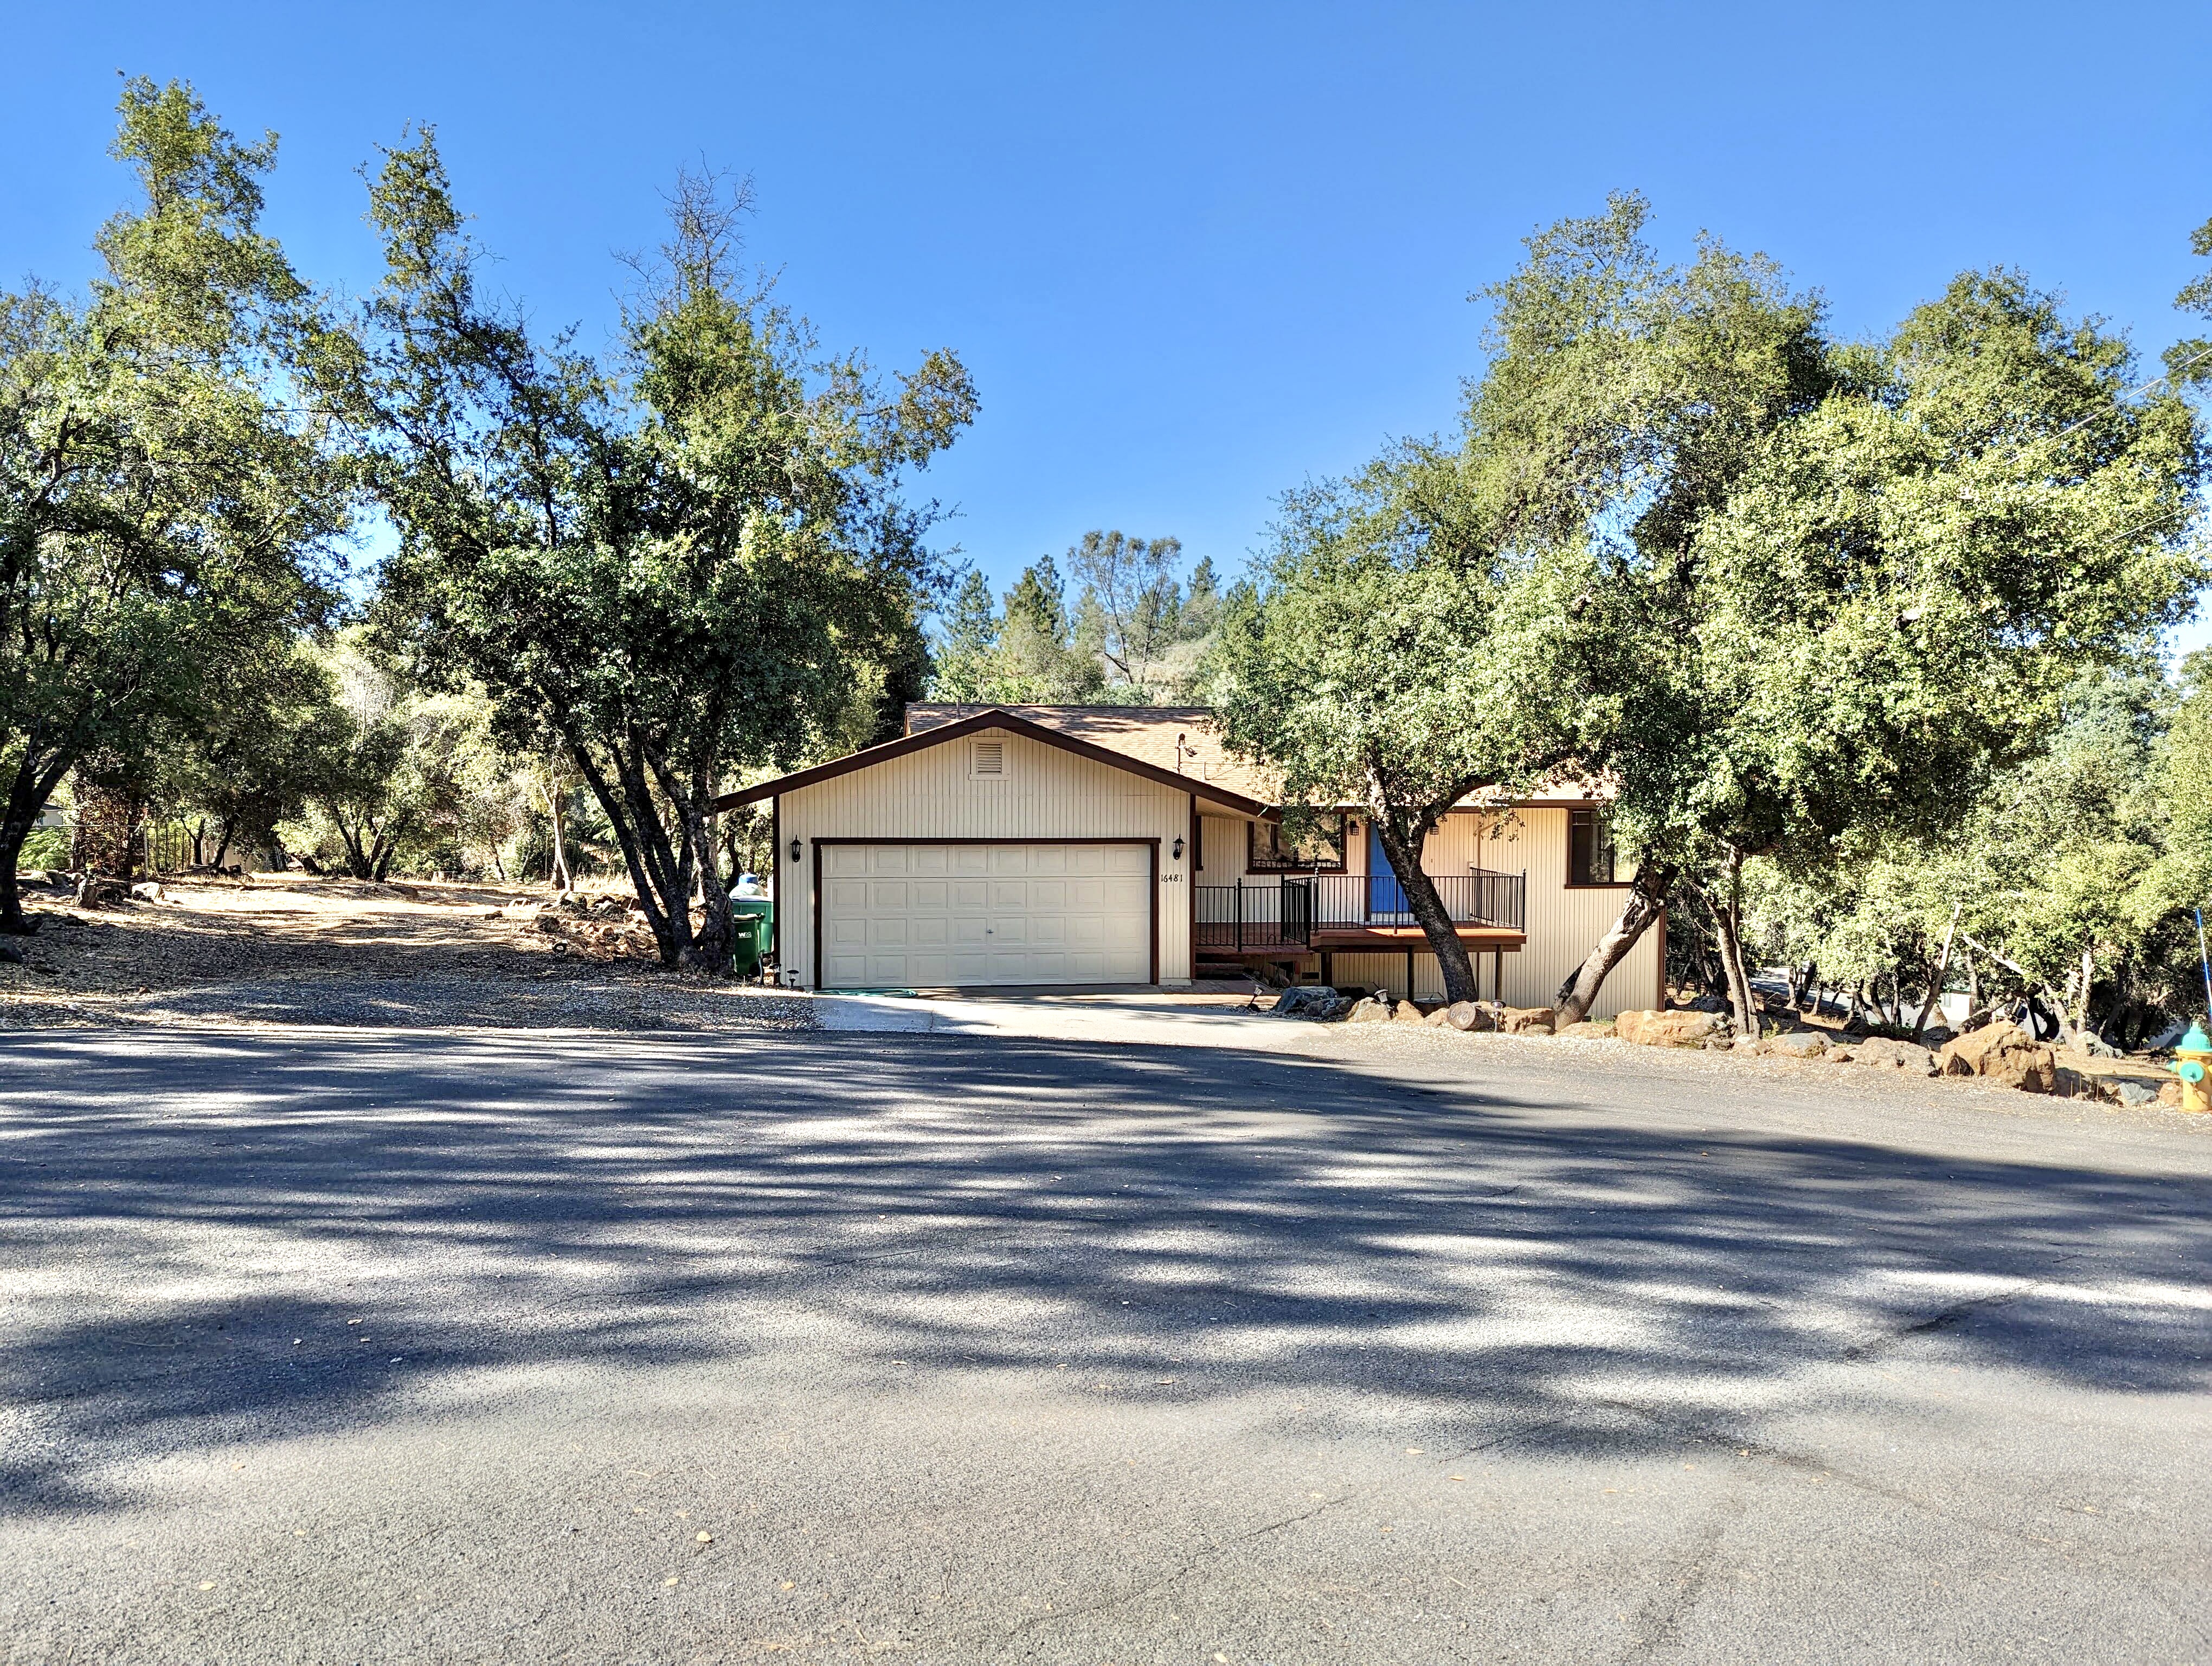 FOR RENT: 16481 Tony Court, Grass Valley CA 95949